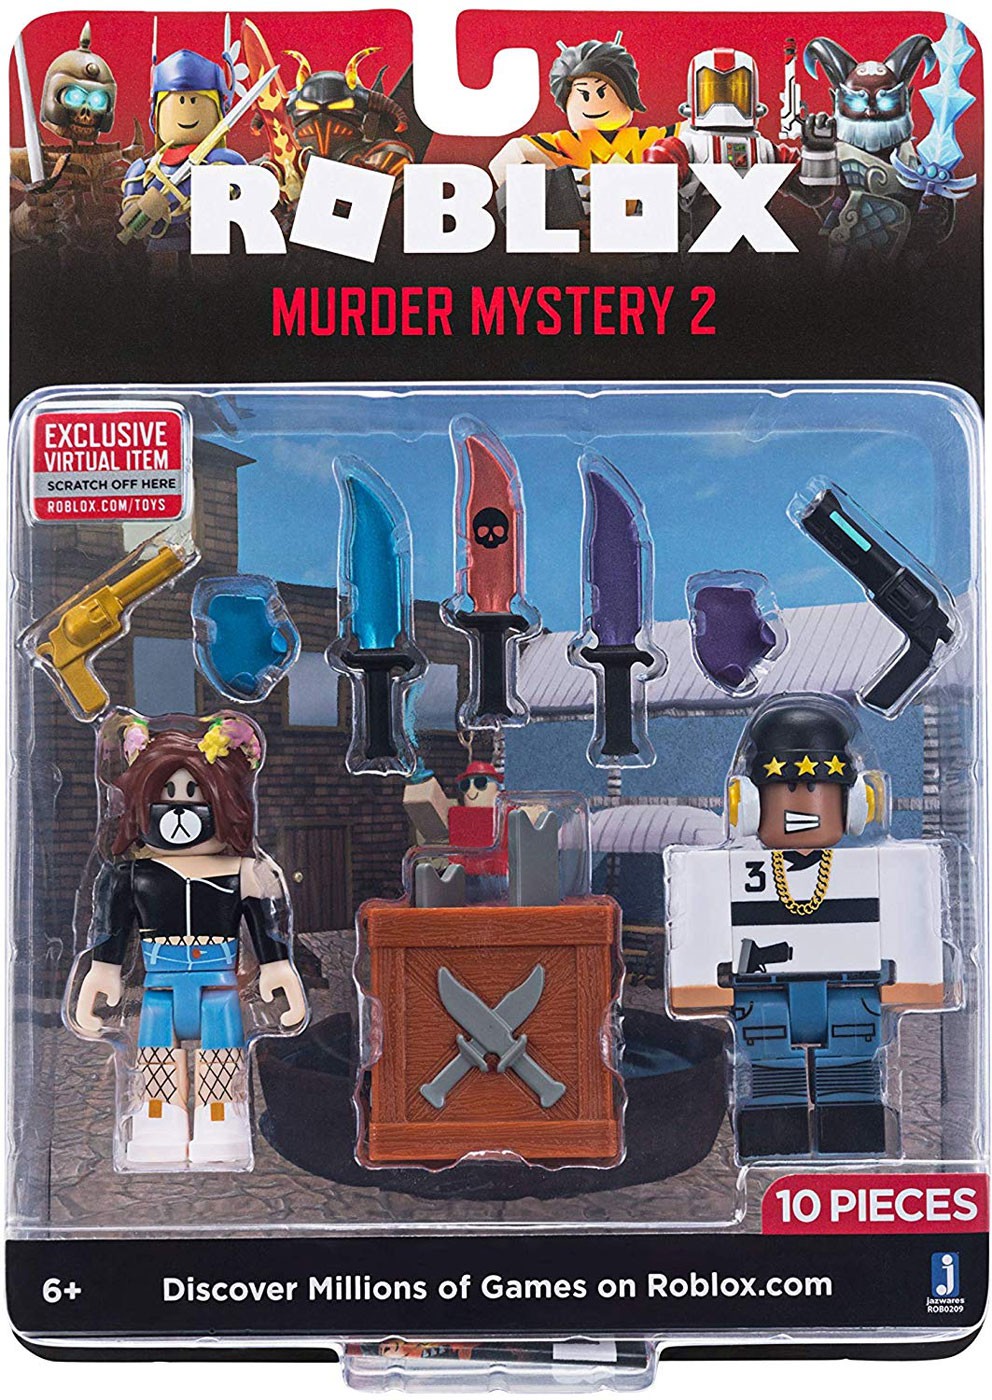 Roblox Murder Mystery 2 Action Figure 2 Pack 191726004141 Ebay - toys roblox history mystery action figures